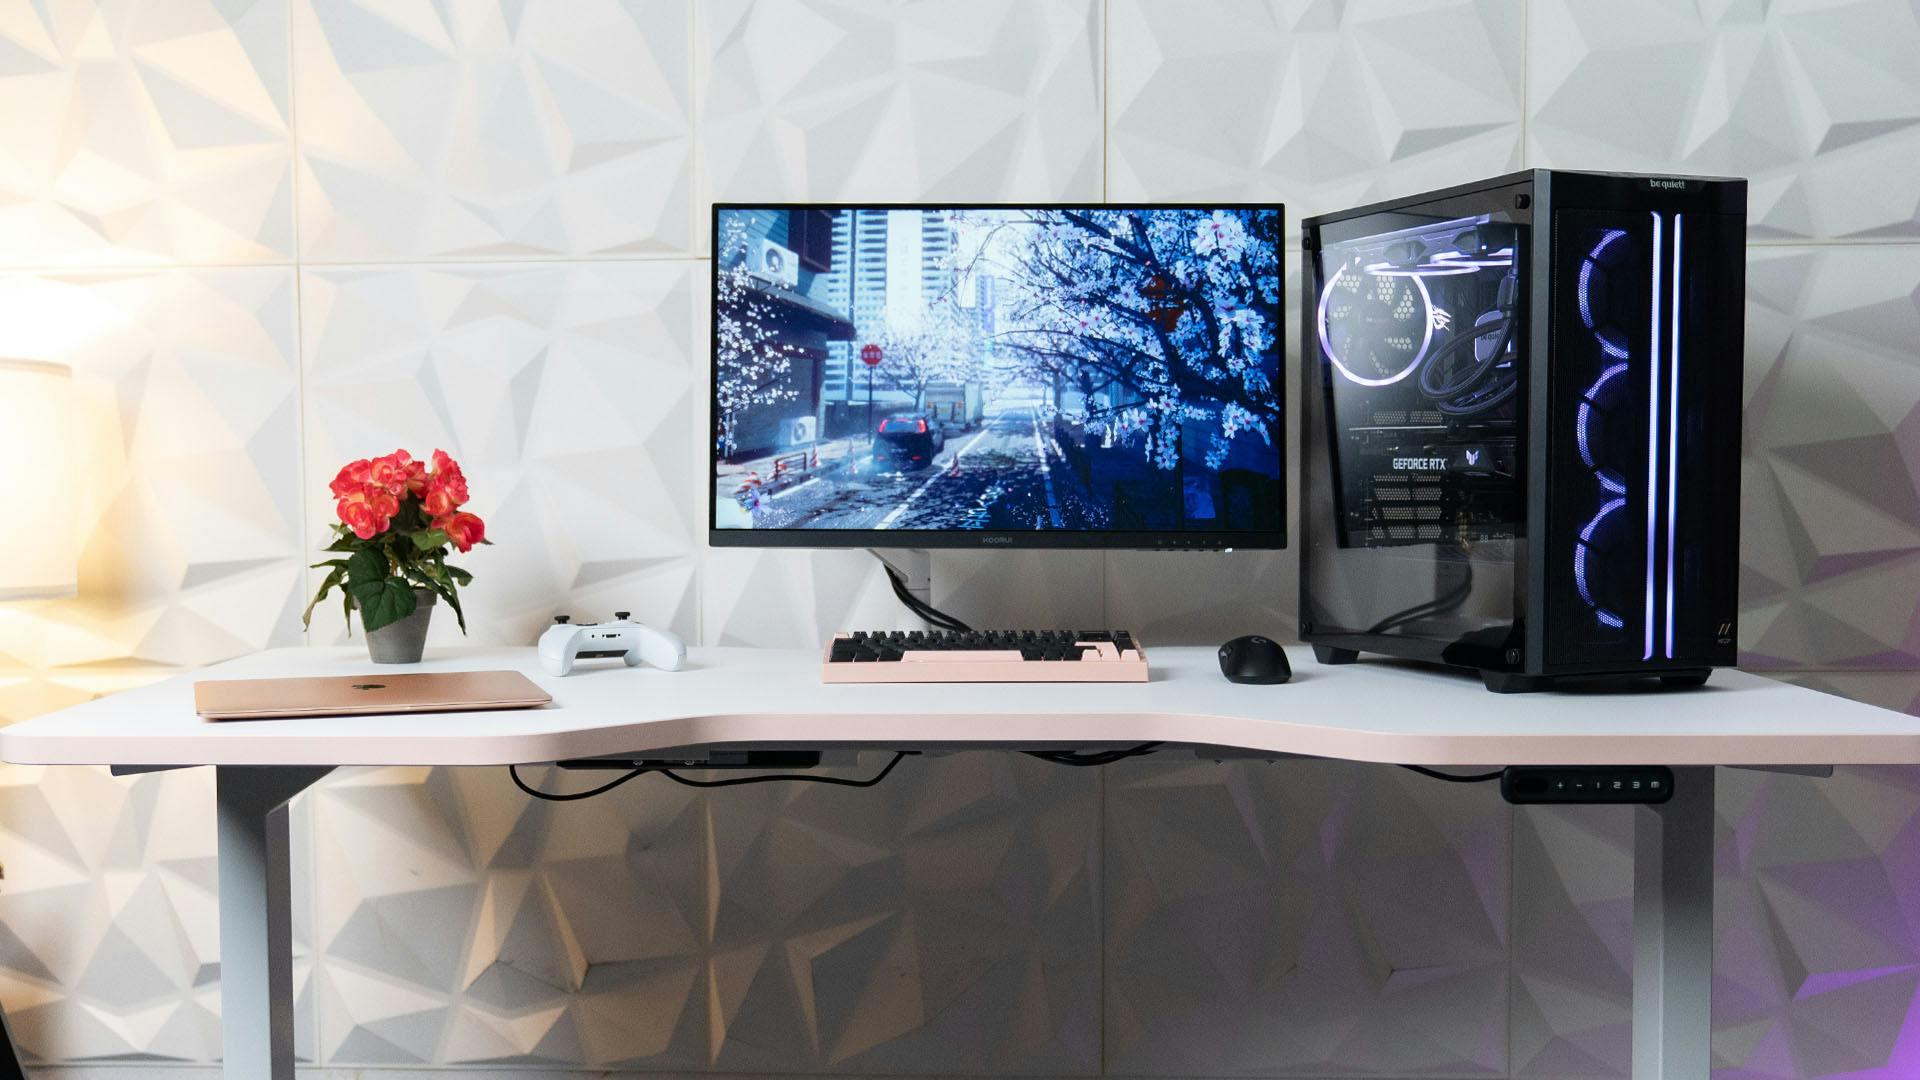 Cable Management for Gaming and Home Office Setups